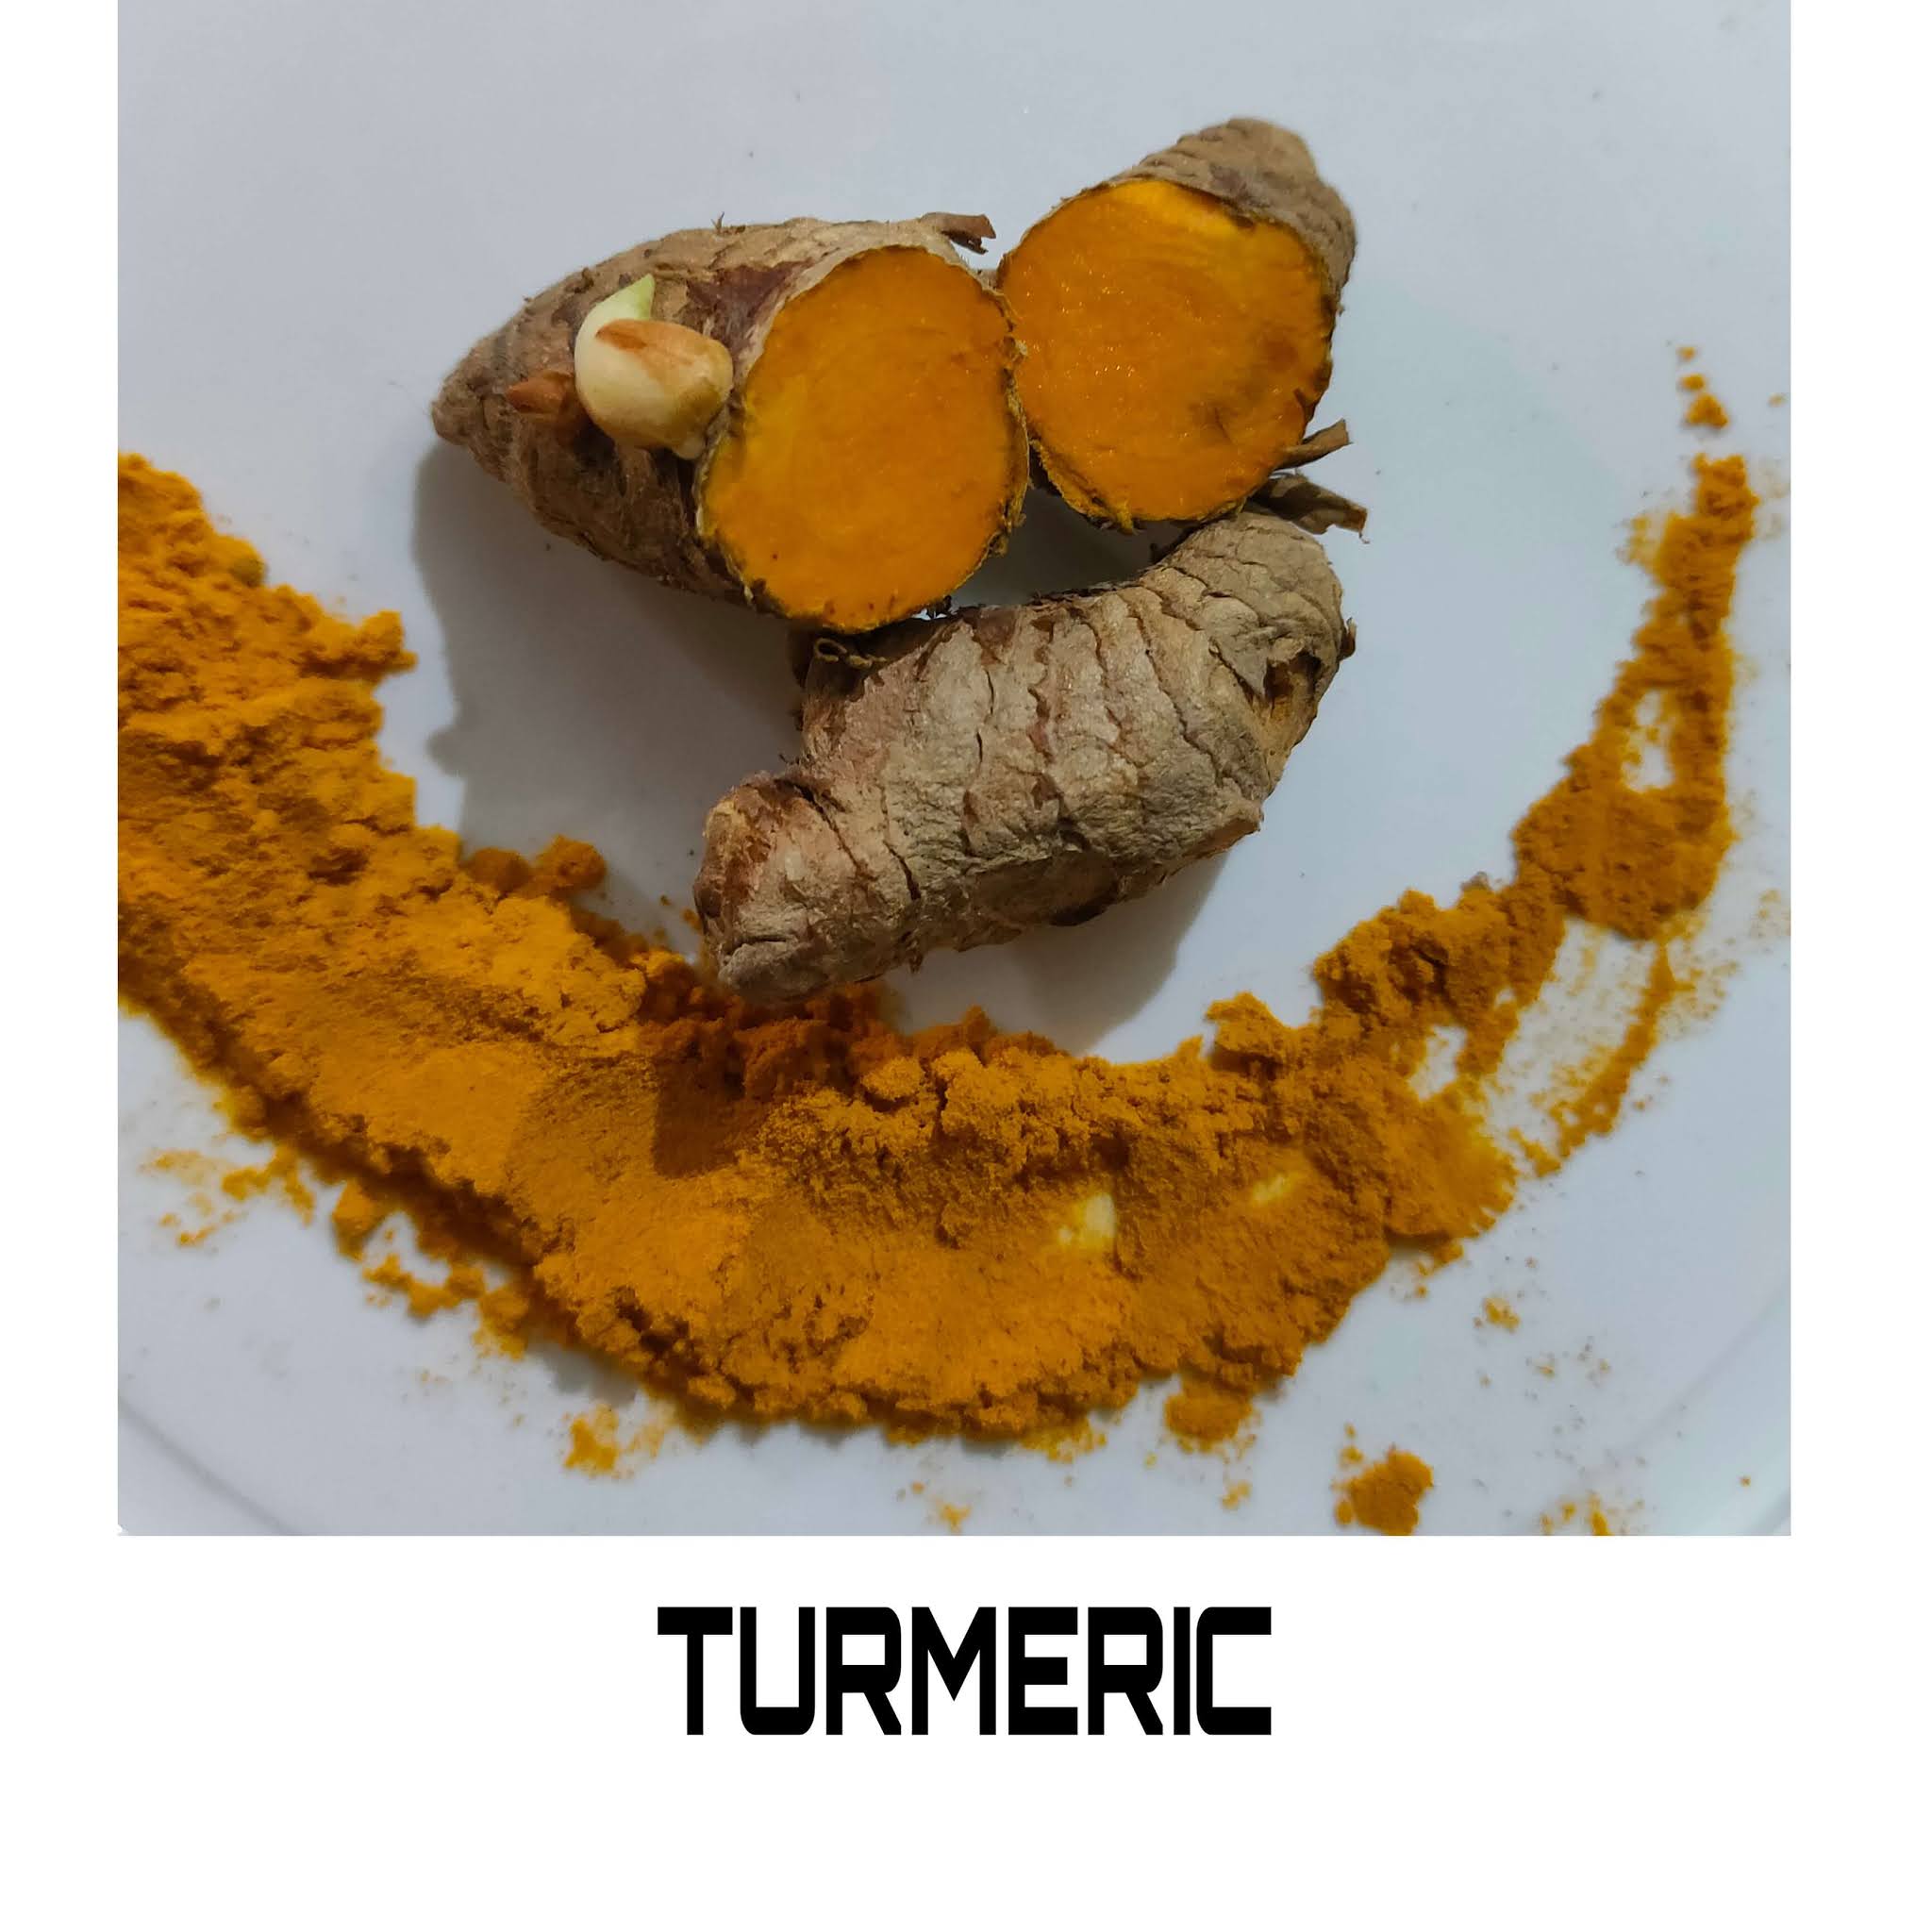 Turmeric is one of the top 5 medicinal plants every household should have